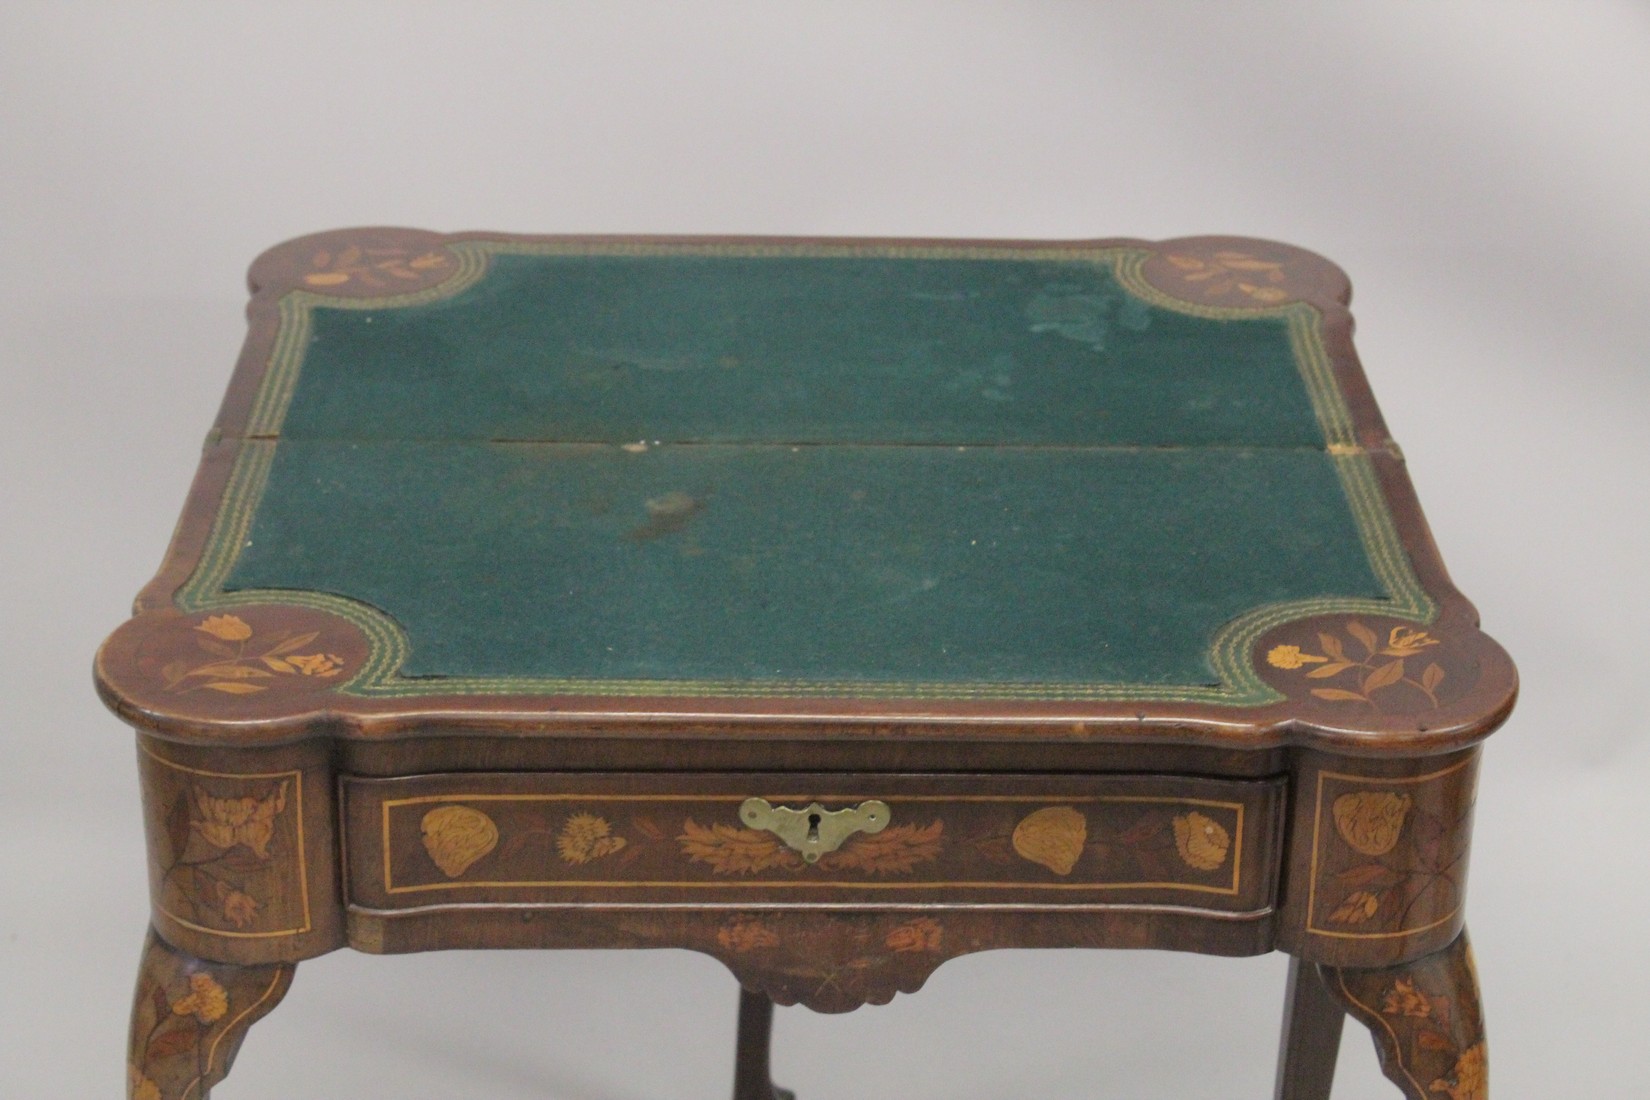 A NEAR PAIR OF 18TH CENTURY DUTCH MARQUETRY FOLDING TOP CARD TABLES inlaid with flowers, birds and - Image 9 of 11